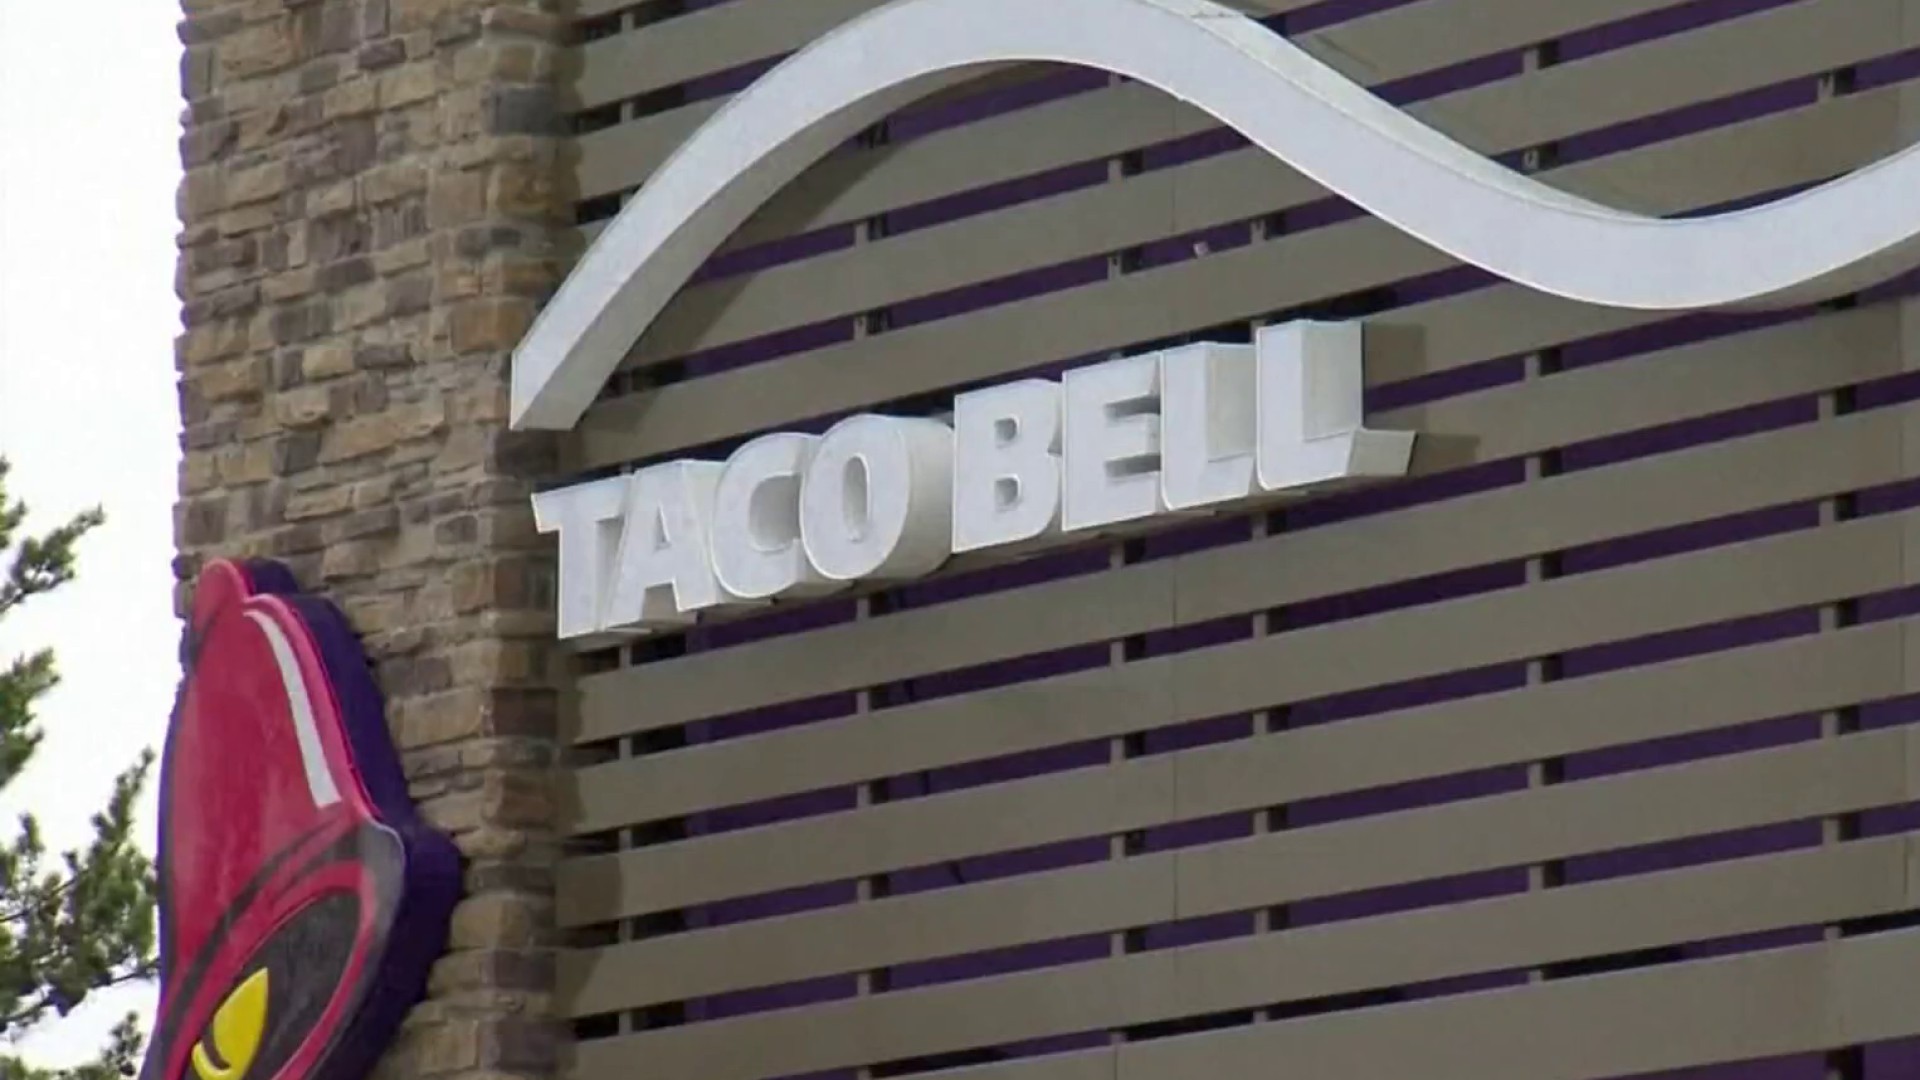 Taco Bell ordered to payout gift cards under $10 – NBC Los Angeles